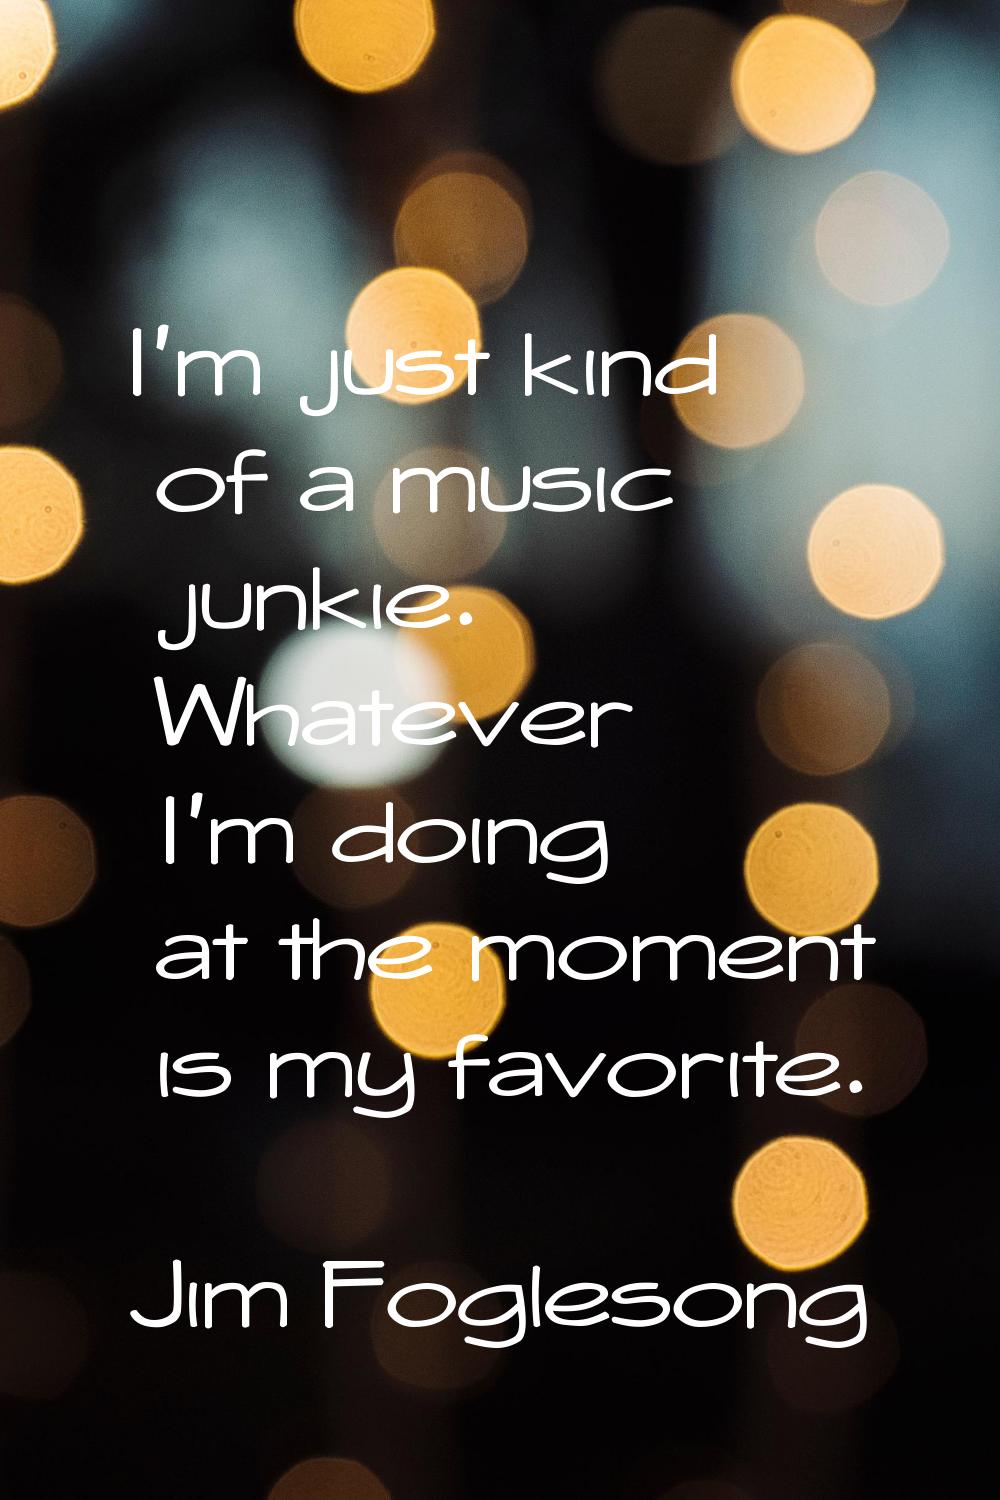 I'm just kind of a music junkie. Whatever I'm doing at the moment is my favorite.